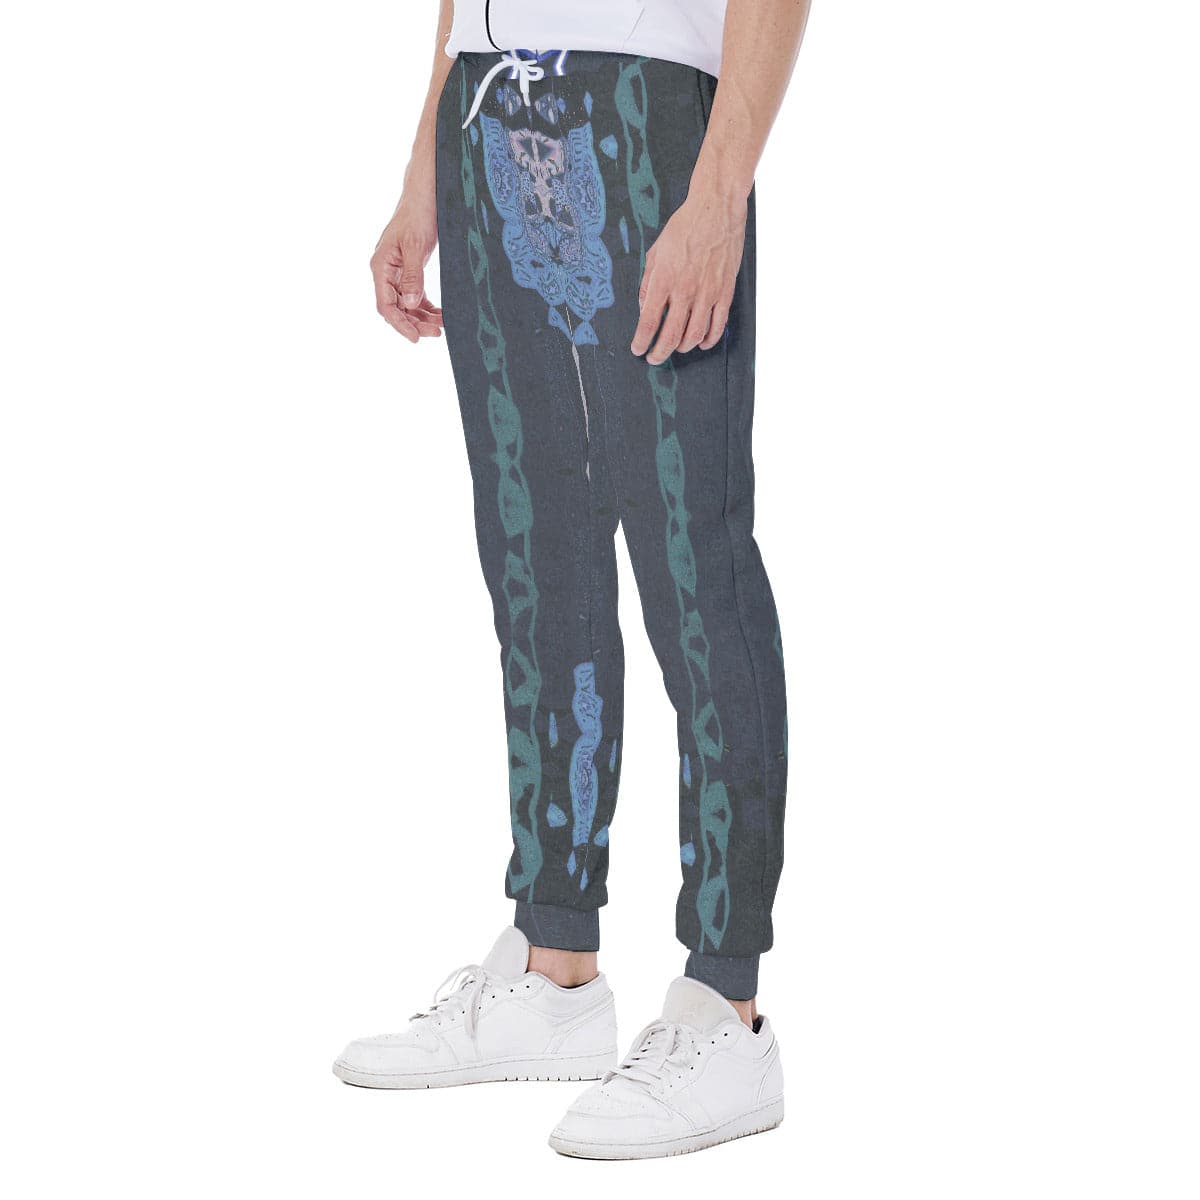 Blue in Blue Fantasy Patterned Men's  Sports and activity Sweatpants, by Sensus Studio Design